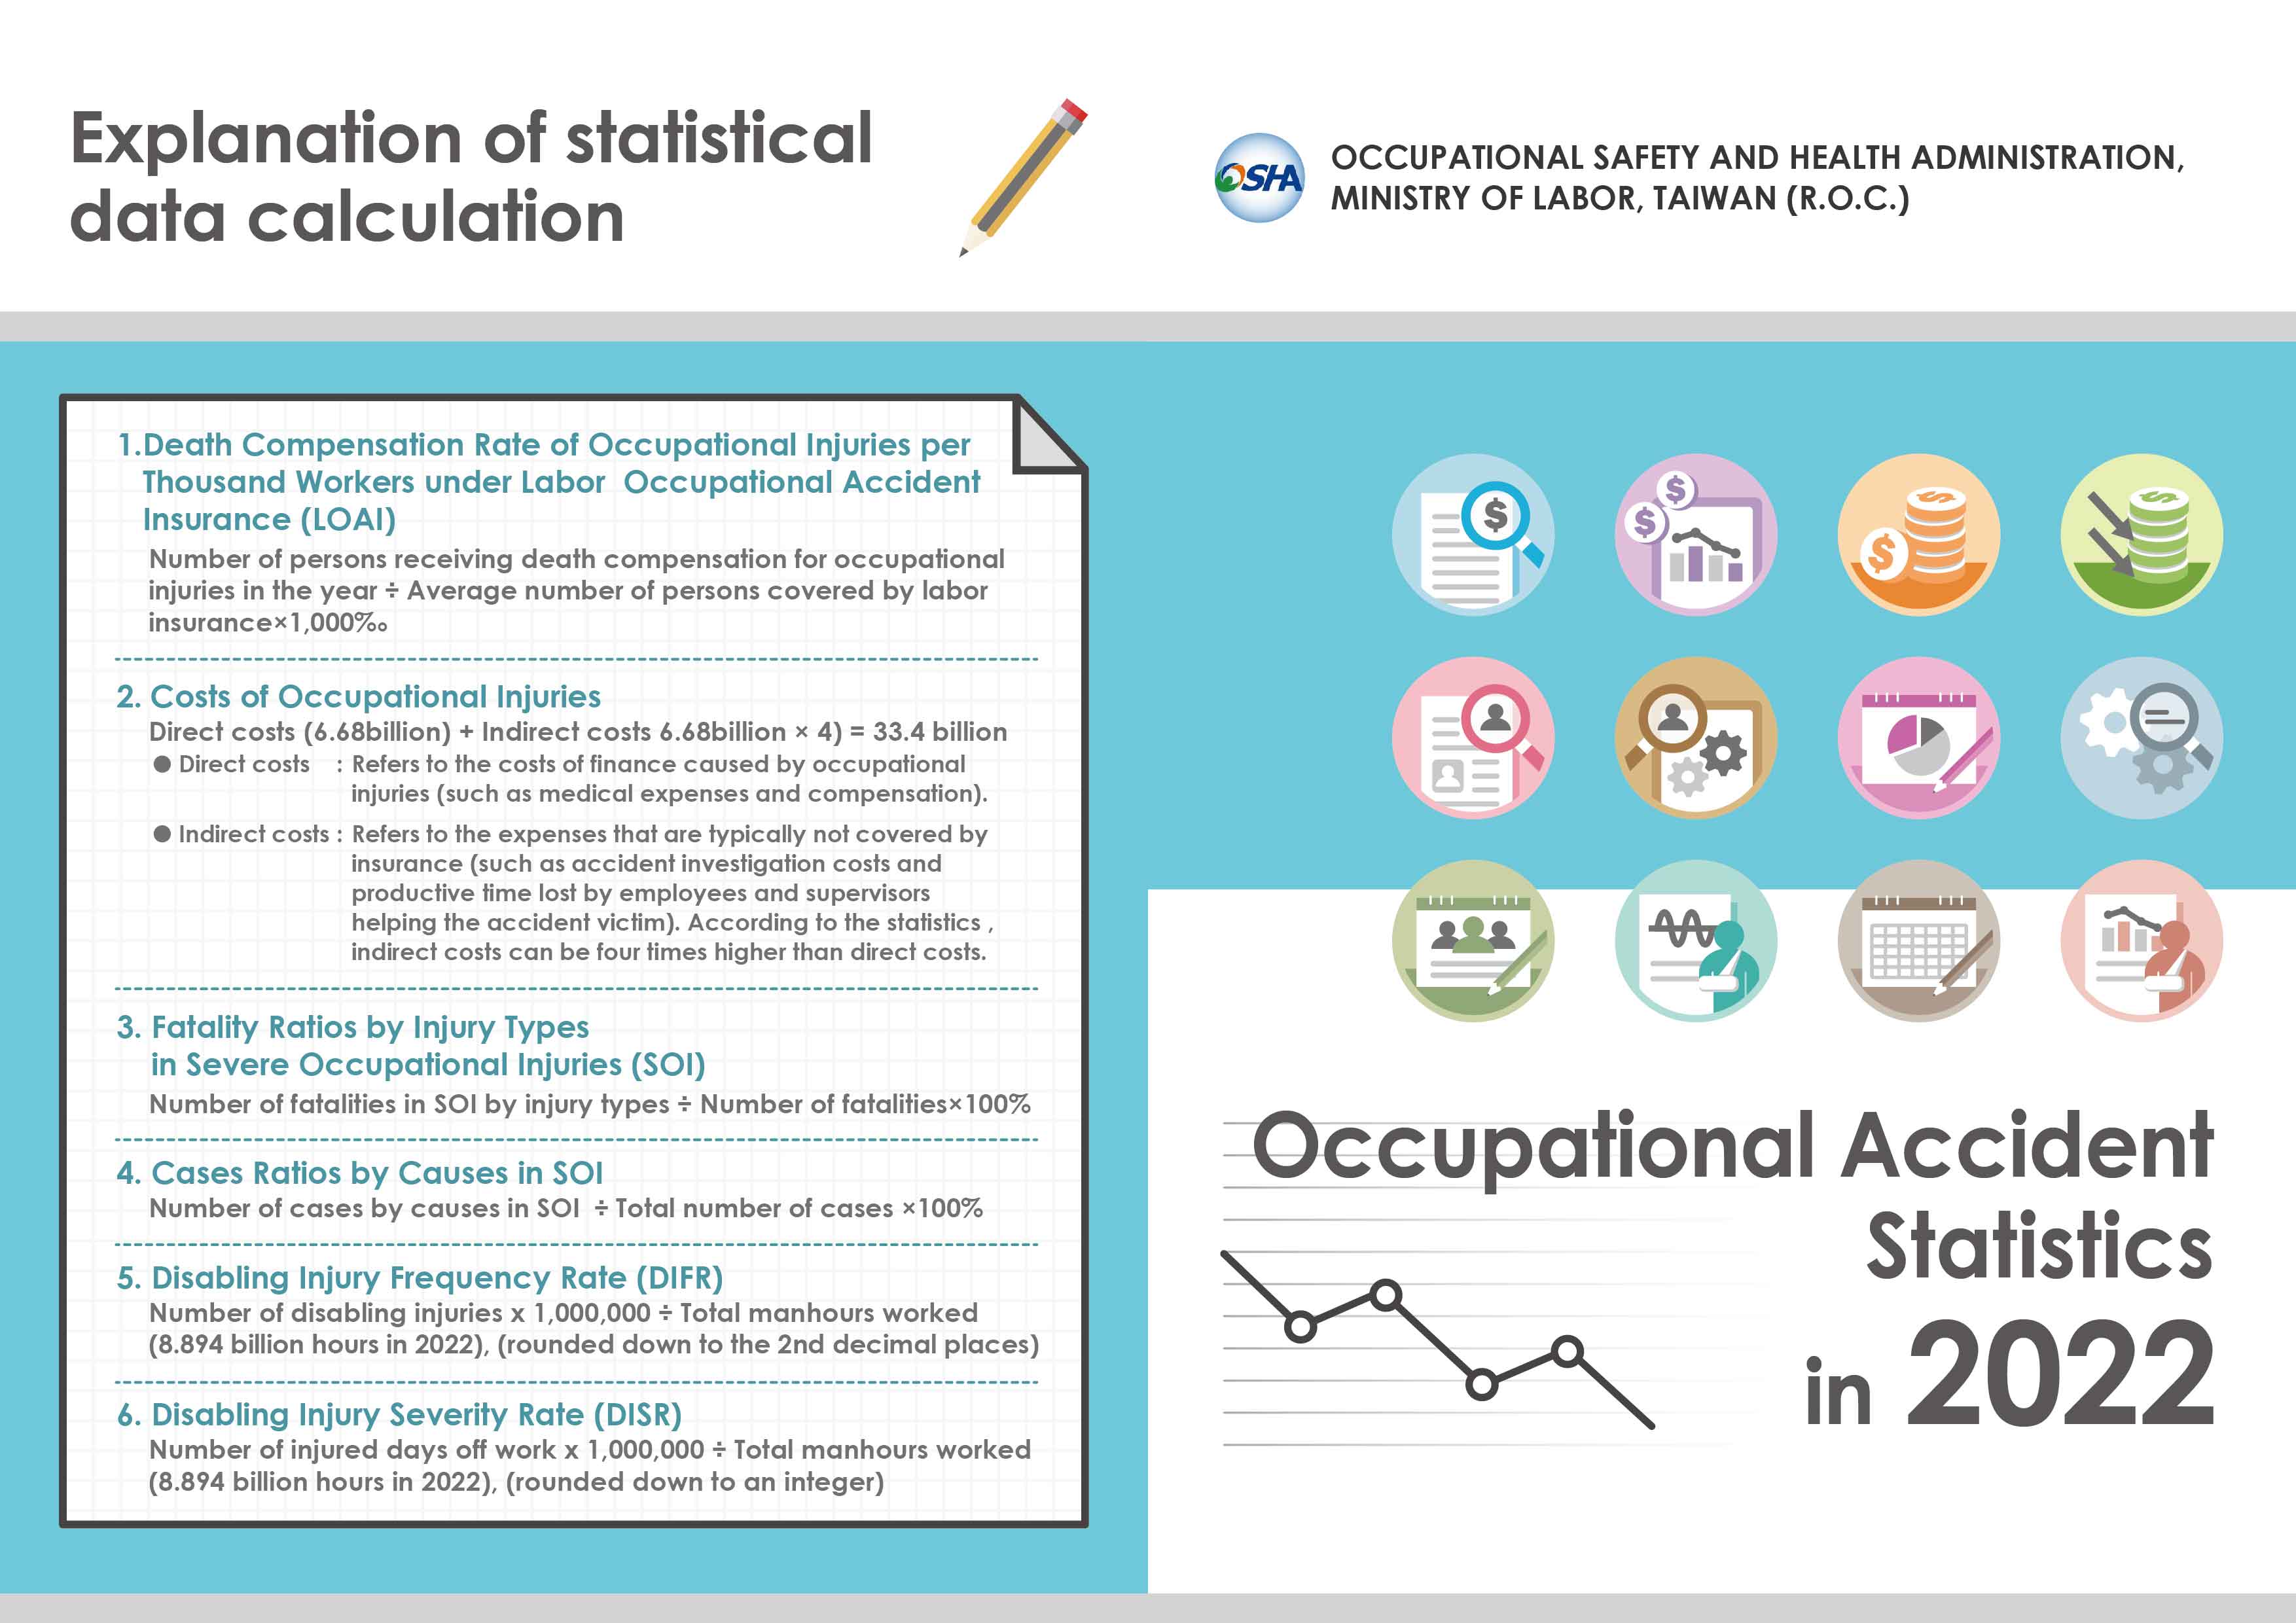 Occupational Accident Statistics in 2022_main